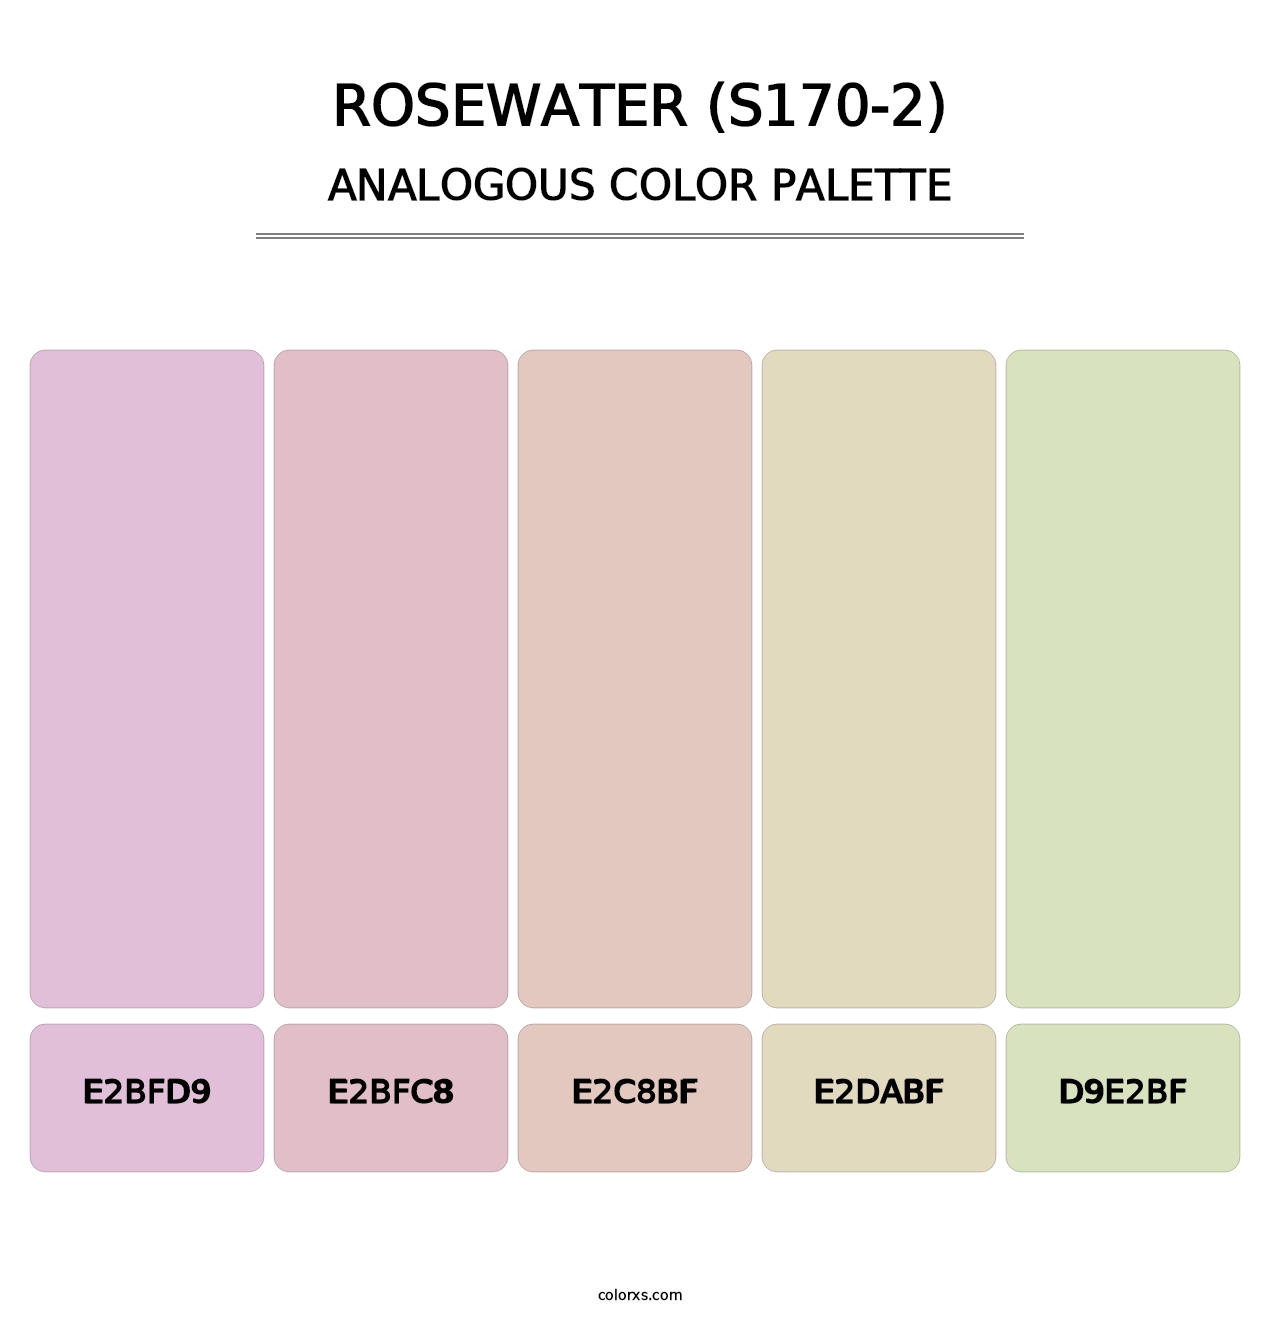 Rosewater (S170-2) - Analogous Color Palette